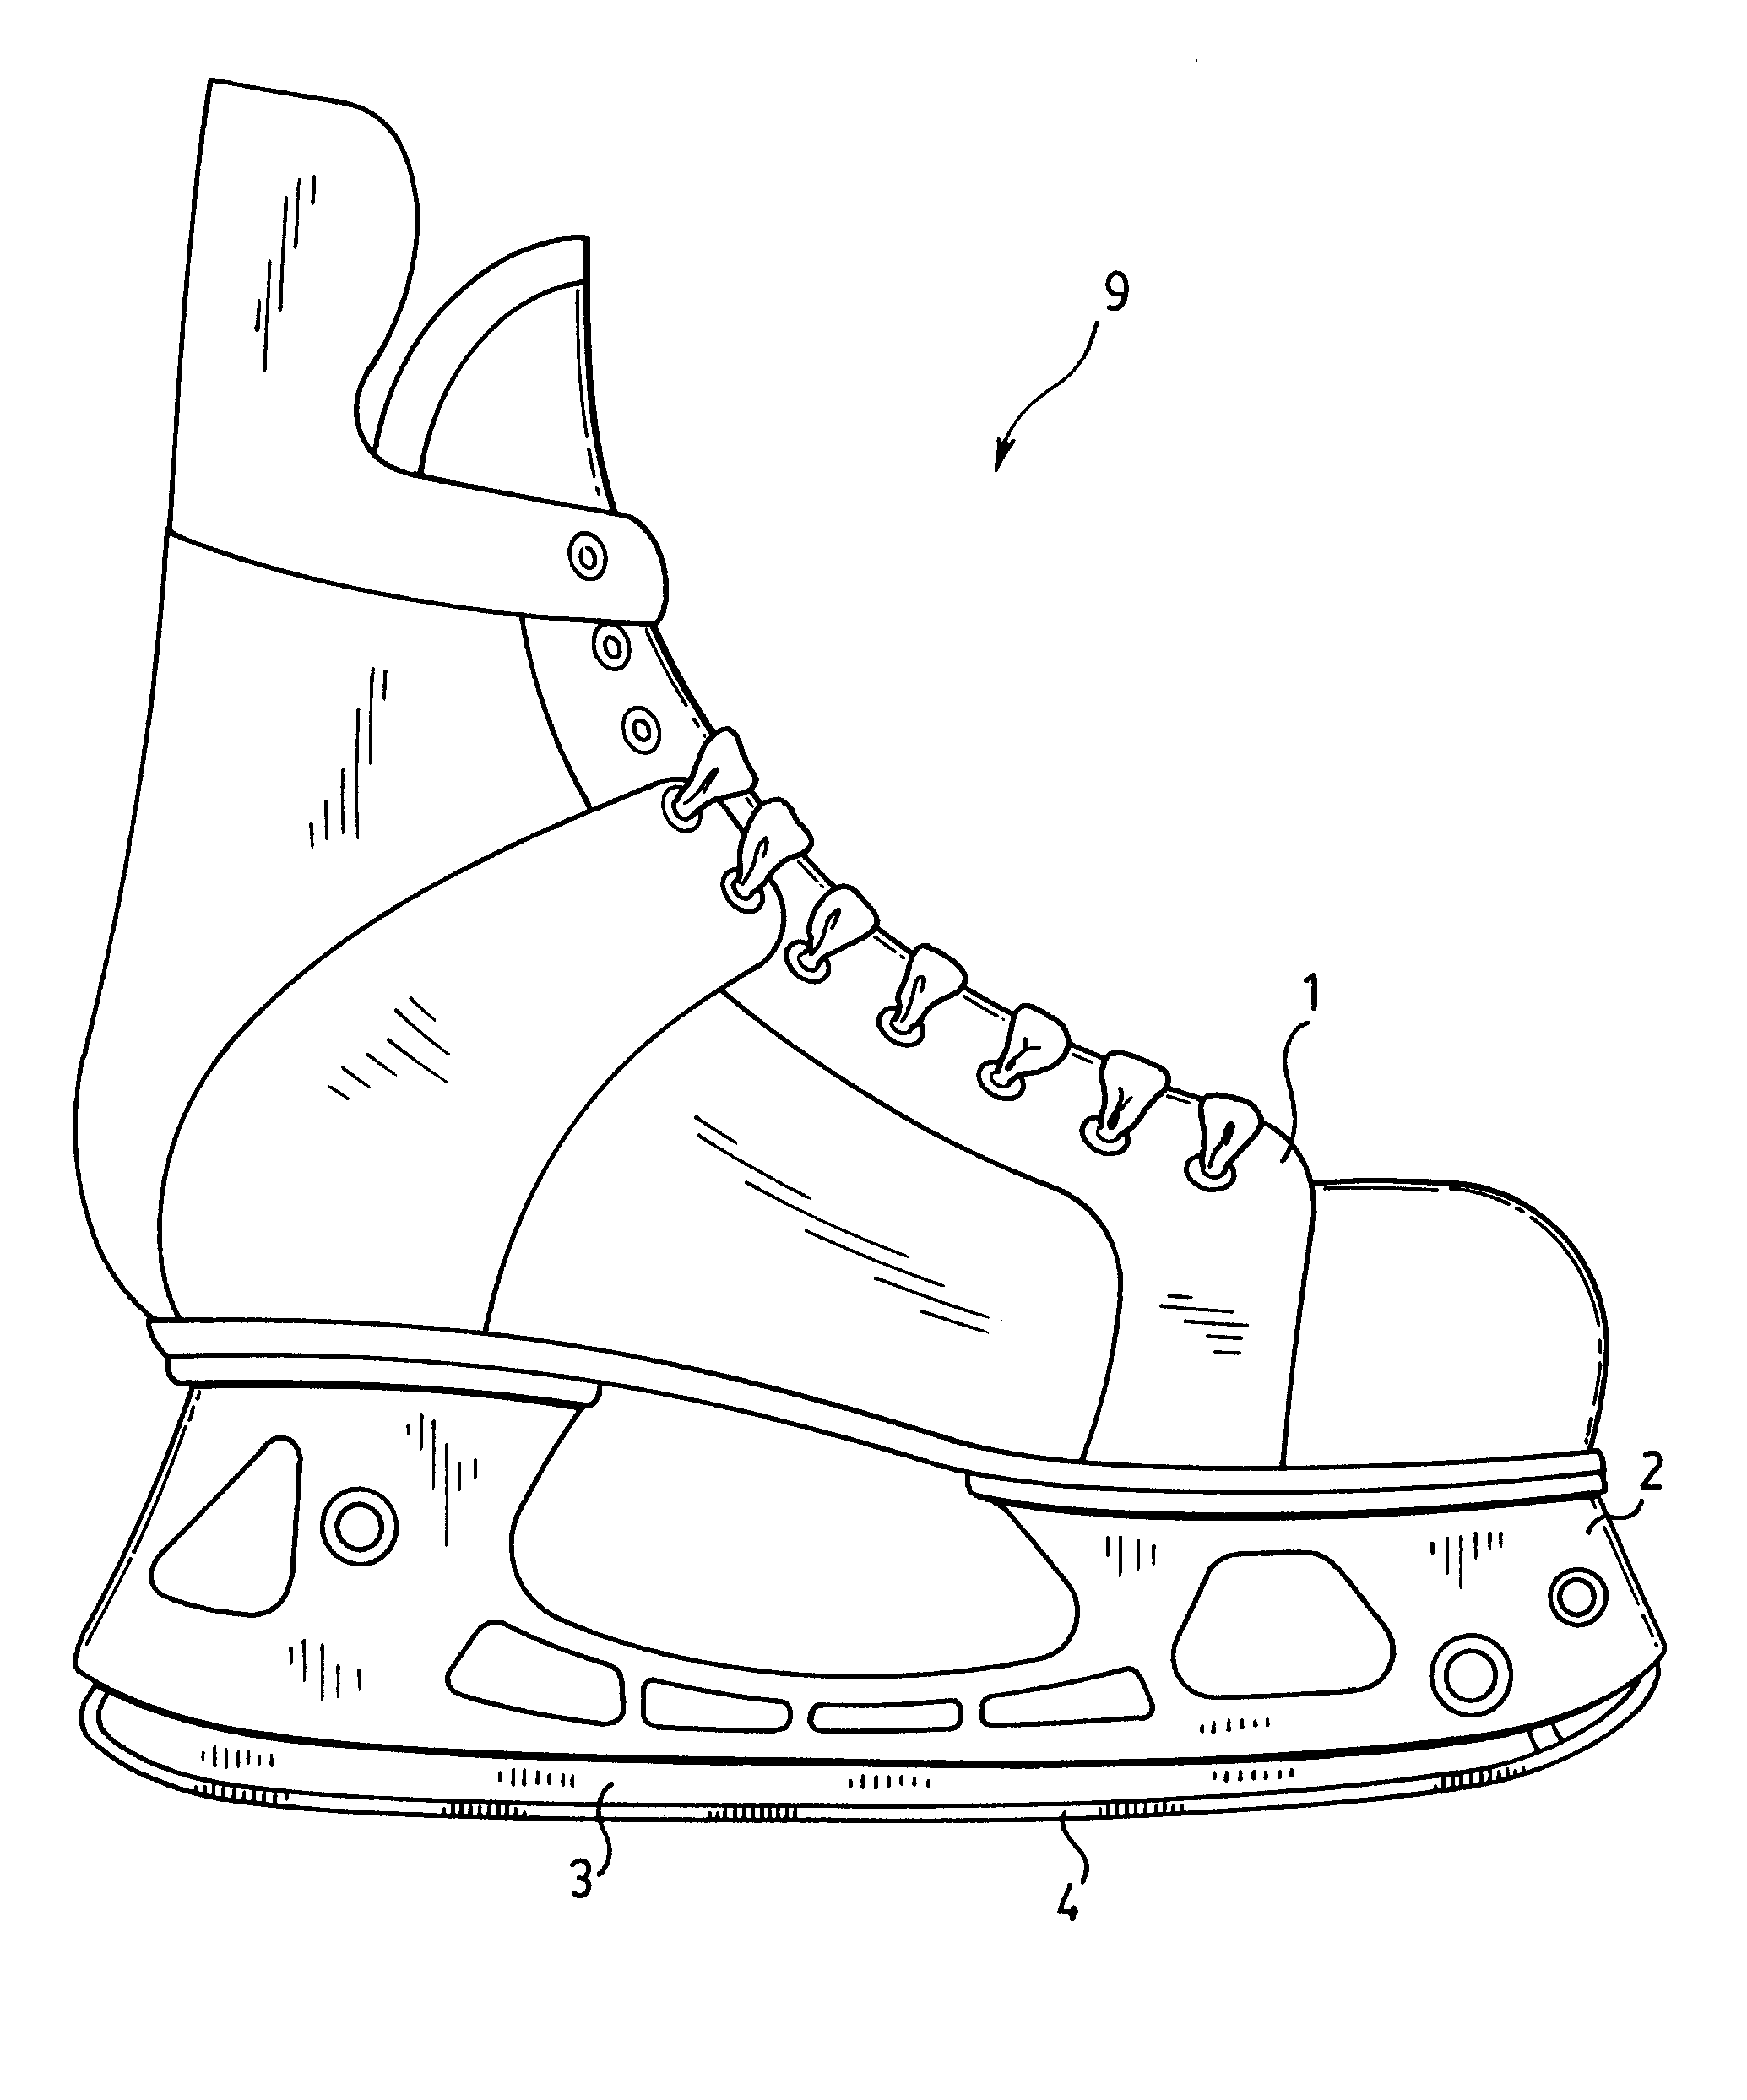 Skate with pivoting rocker and replaceable blade